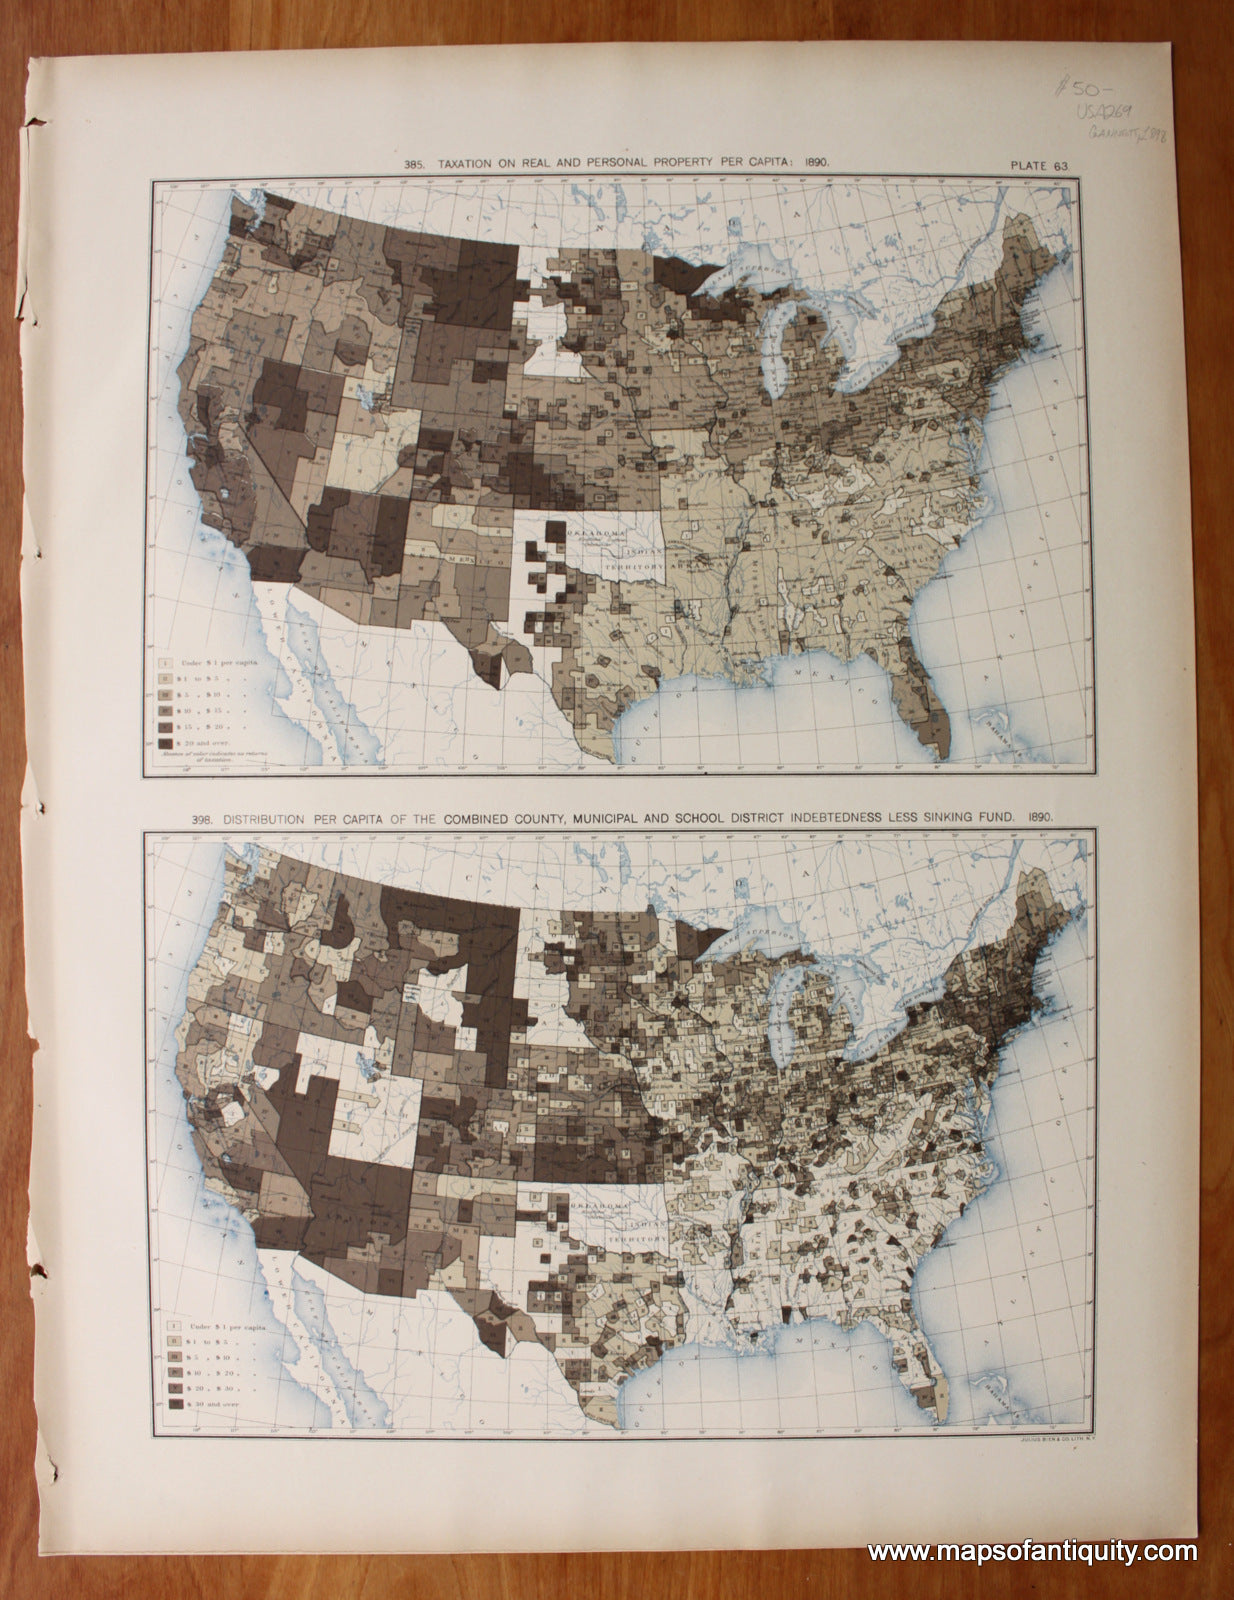 Antique-Printed-Color-Map-Taxation-on-Real-and-Personal-Property-Per-Capita:-1890/-Distribution-Per-Capita-of-the-Combined-County-Municipal-and-School-District-Indebtedness-Less-Sinking-Fund:-1890-United-States-United-States-General-1898-Gannett-Maps-Of-Antiquity